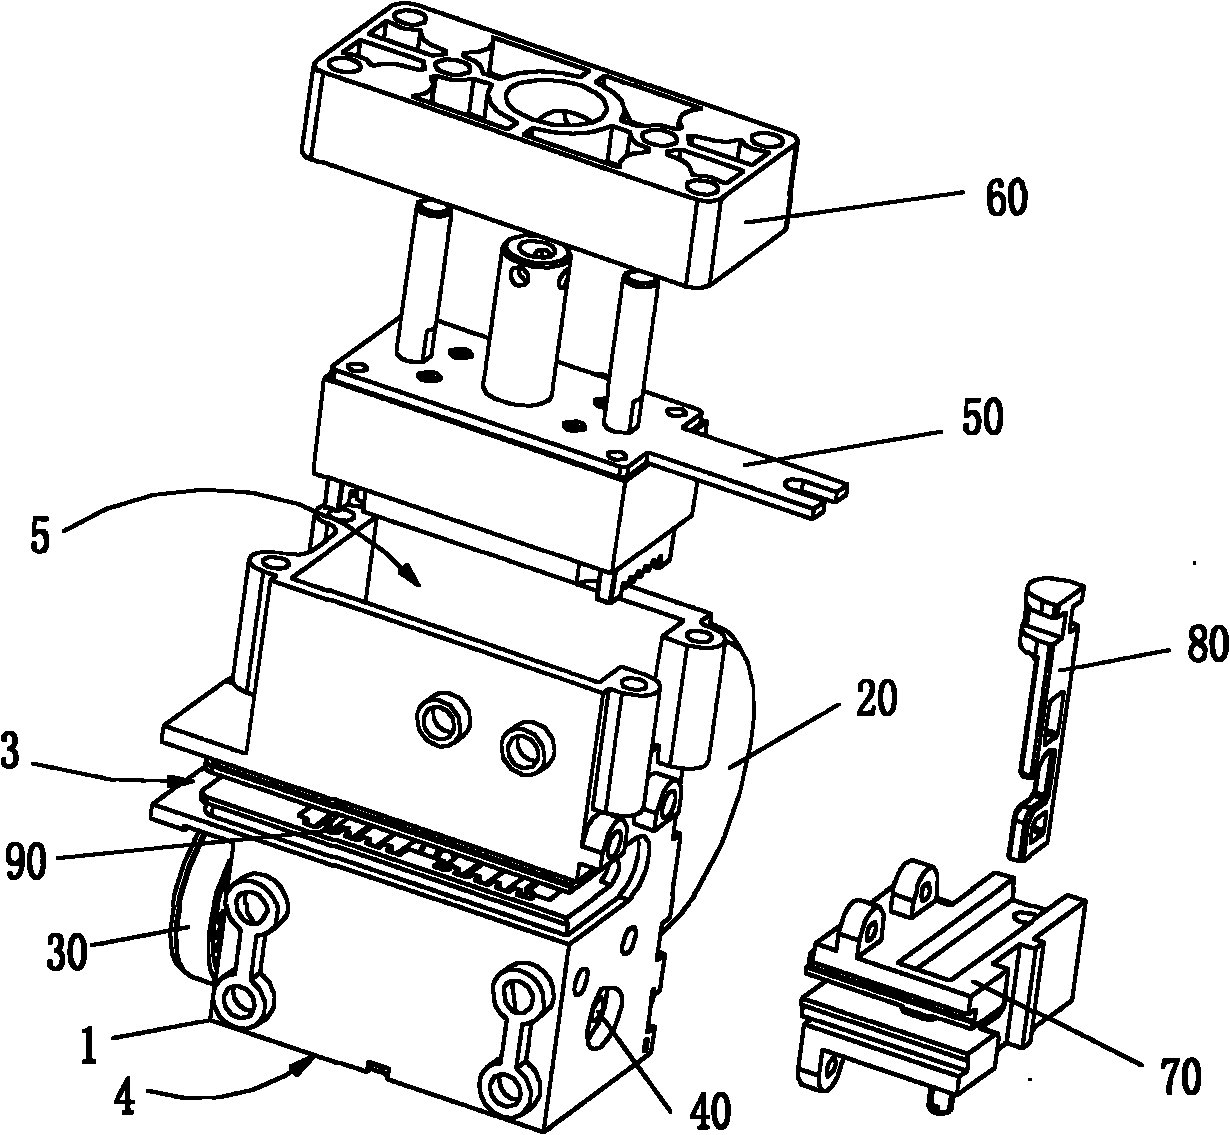 Infusion pump and pump body bracket thereof